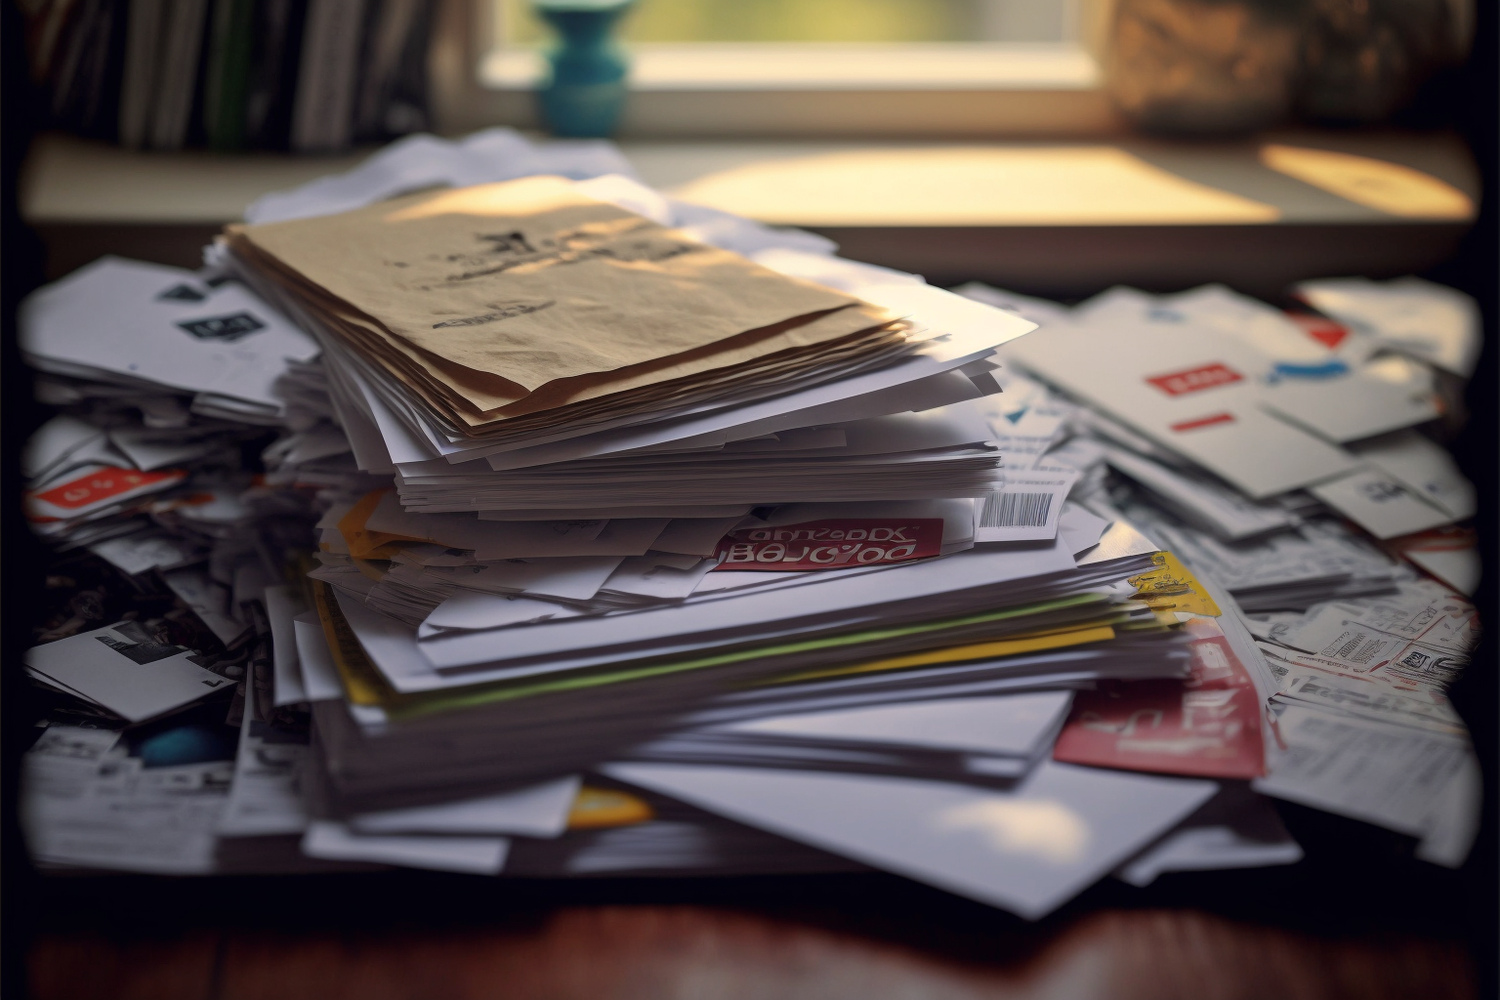 A stack of junk mail on a desk. Source: Midjourney